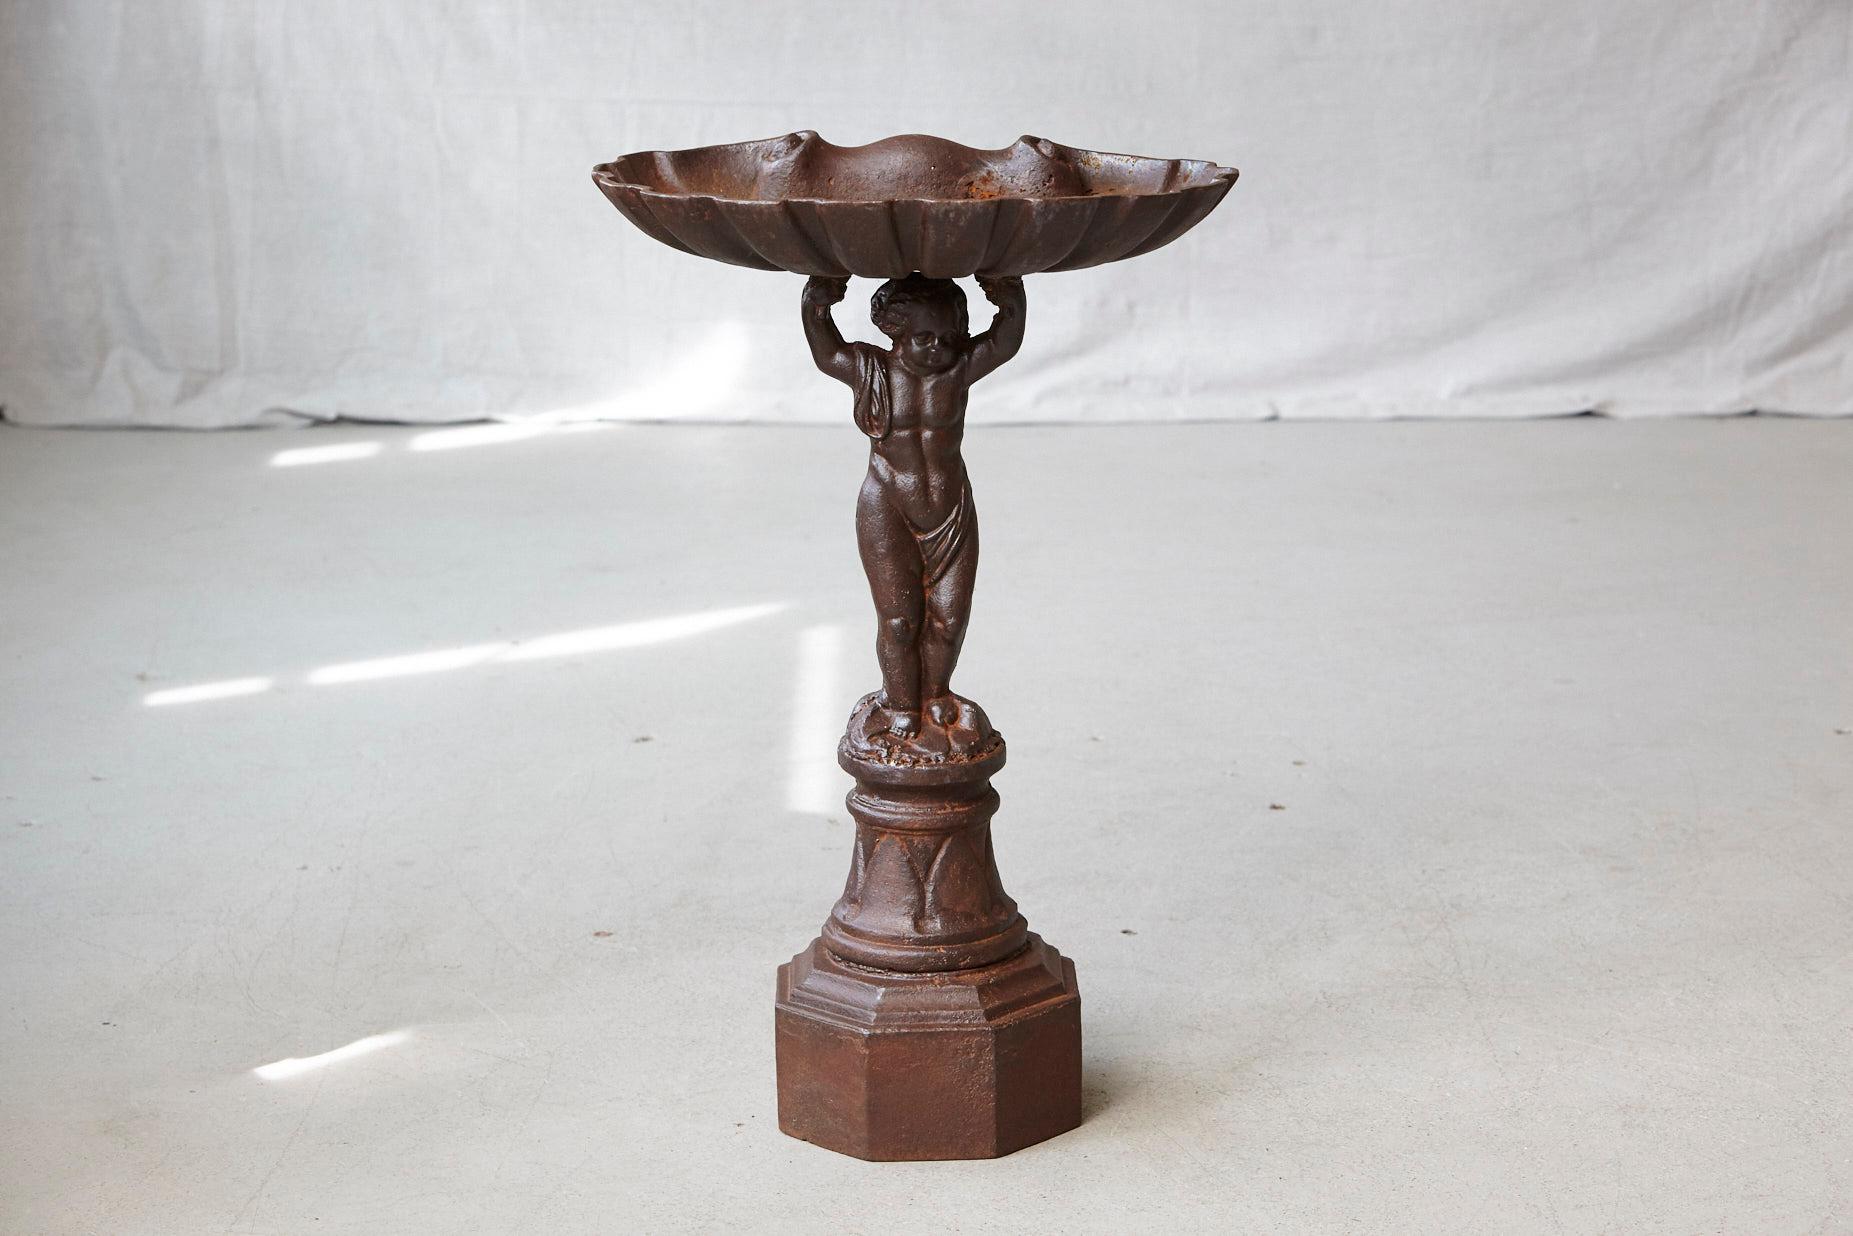 A gorgeous, heavy, cast iron birdbath, showing standing putti with raised arms holding a large shell above his head, mounted on an octagonal base, circa 1900s
Fantastic patina and colors.